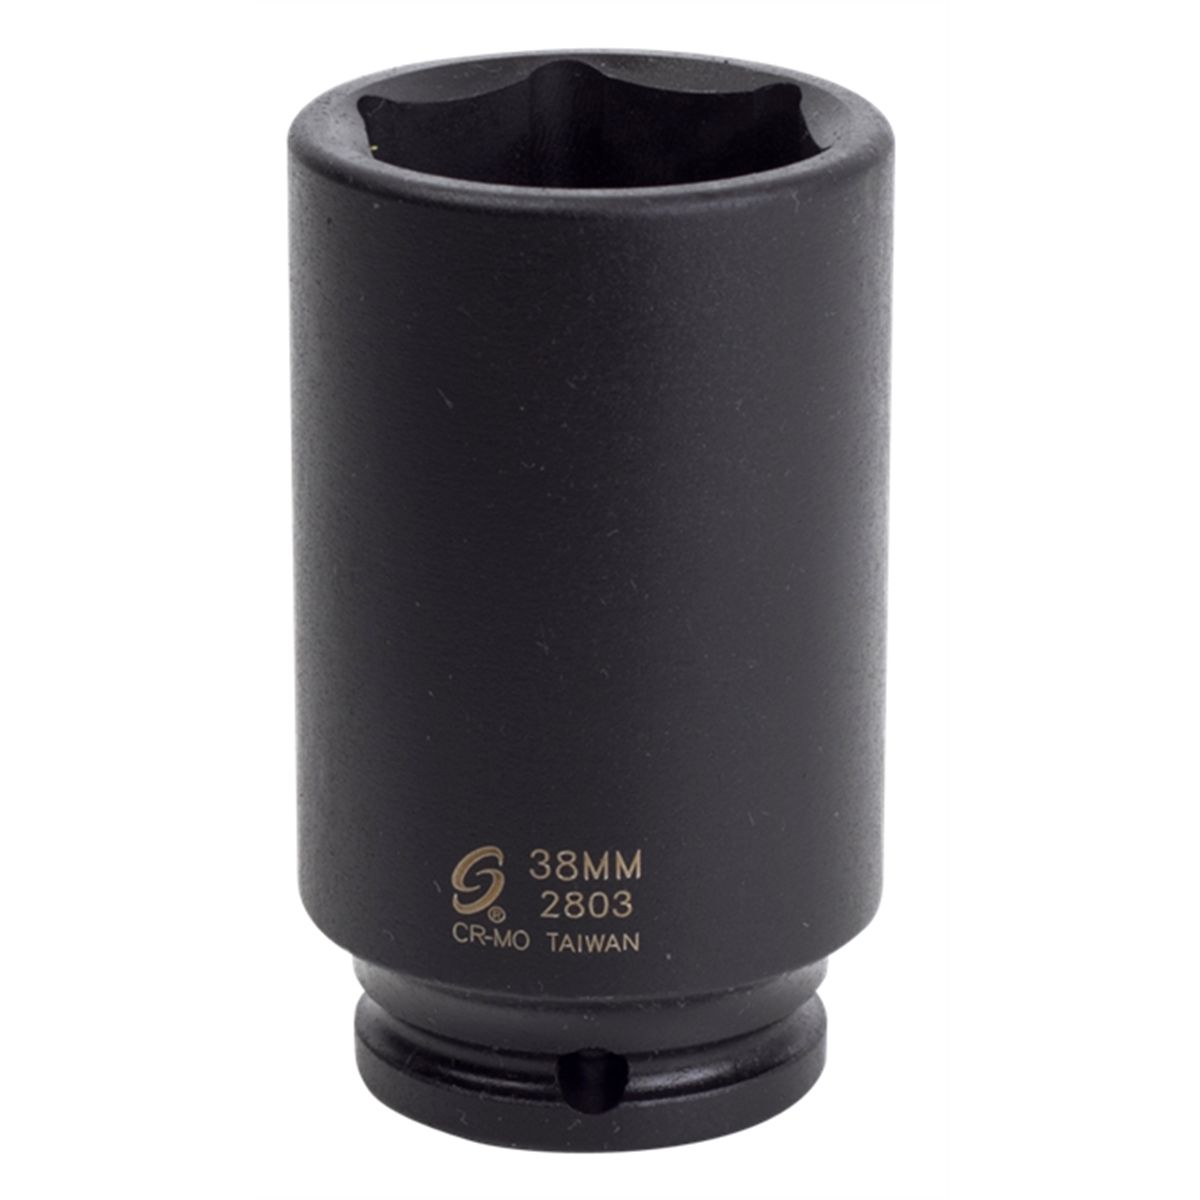 1/2" Drive x 38mm, Deep Spindle Nut Impact Socket